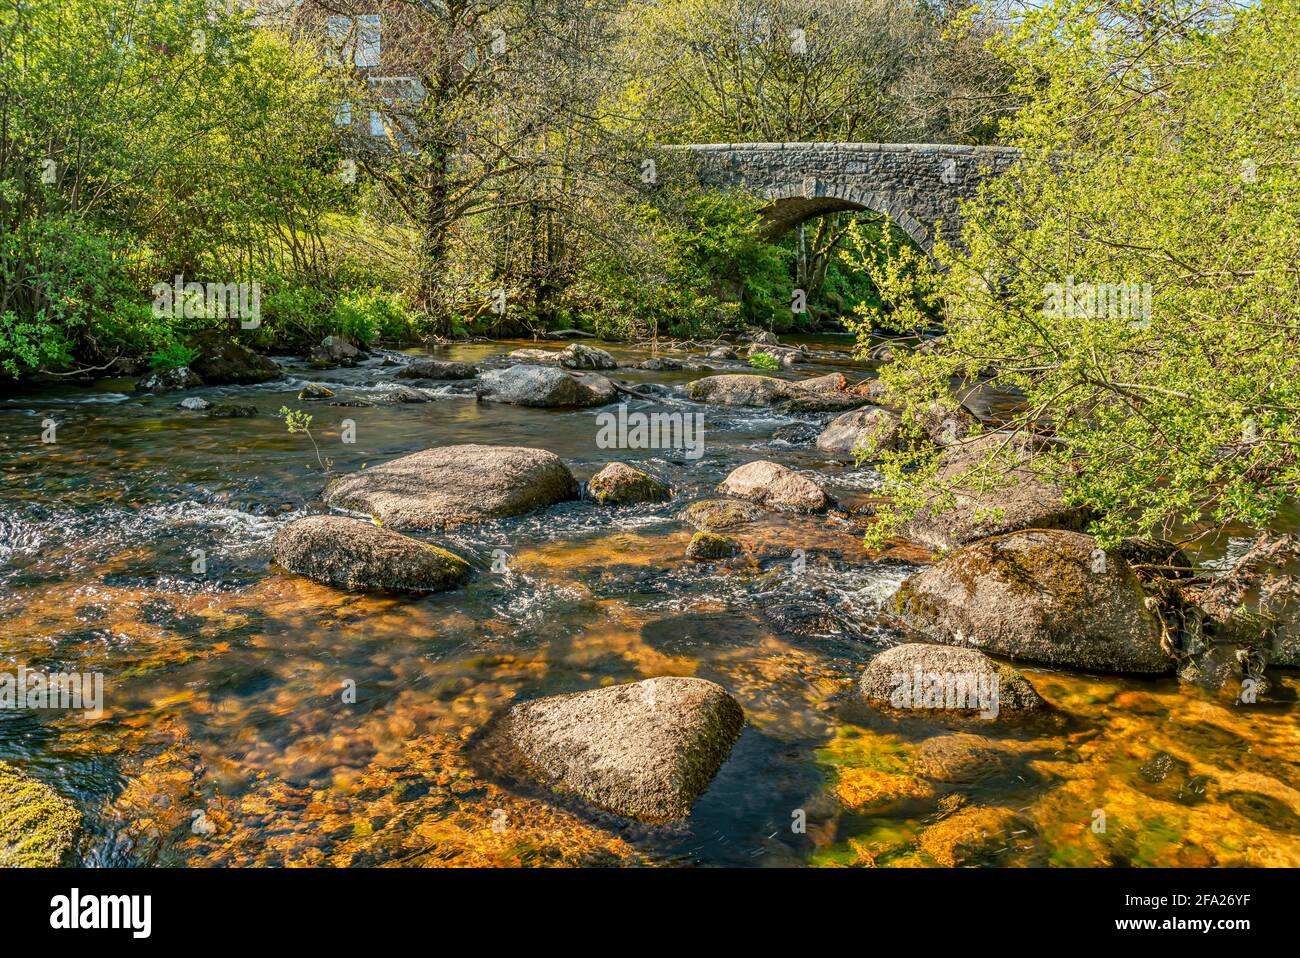 Cherry Brook River at the Castles in the Dart Valley, parc national de Dartmoor, Devon, Angleterre, Royaume-Uni Banque D'Images